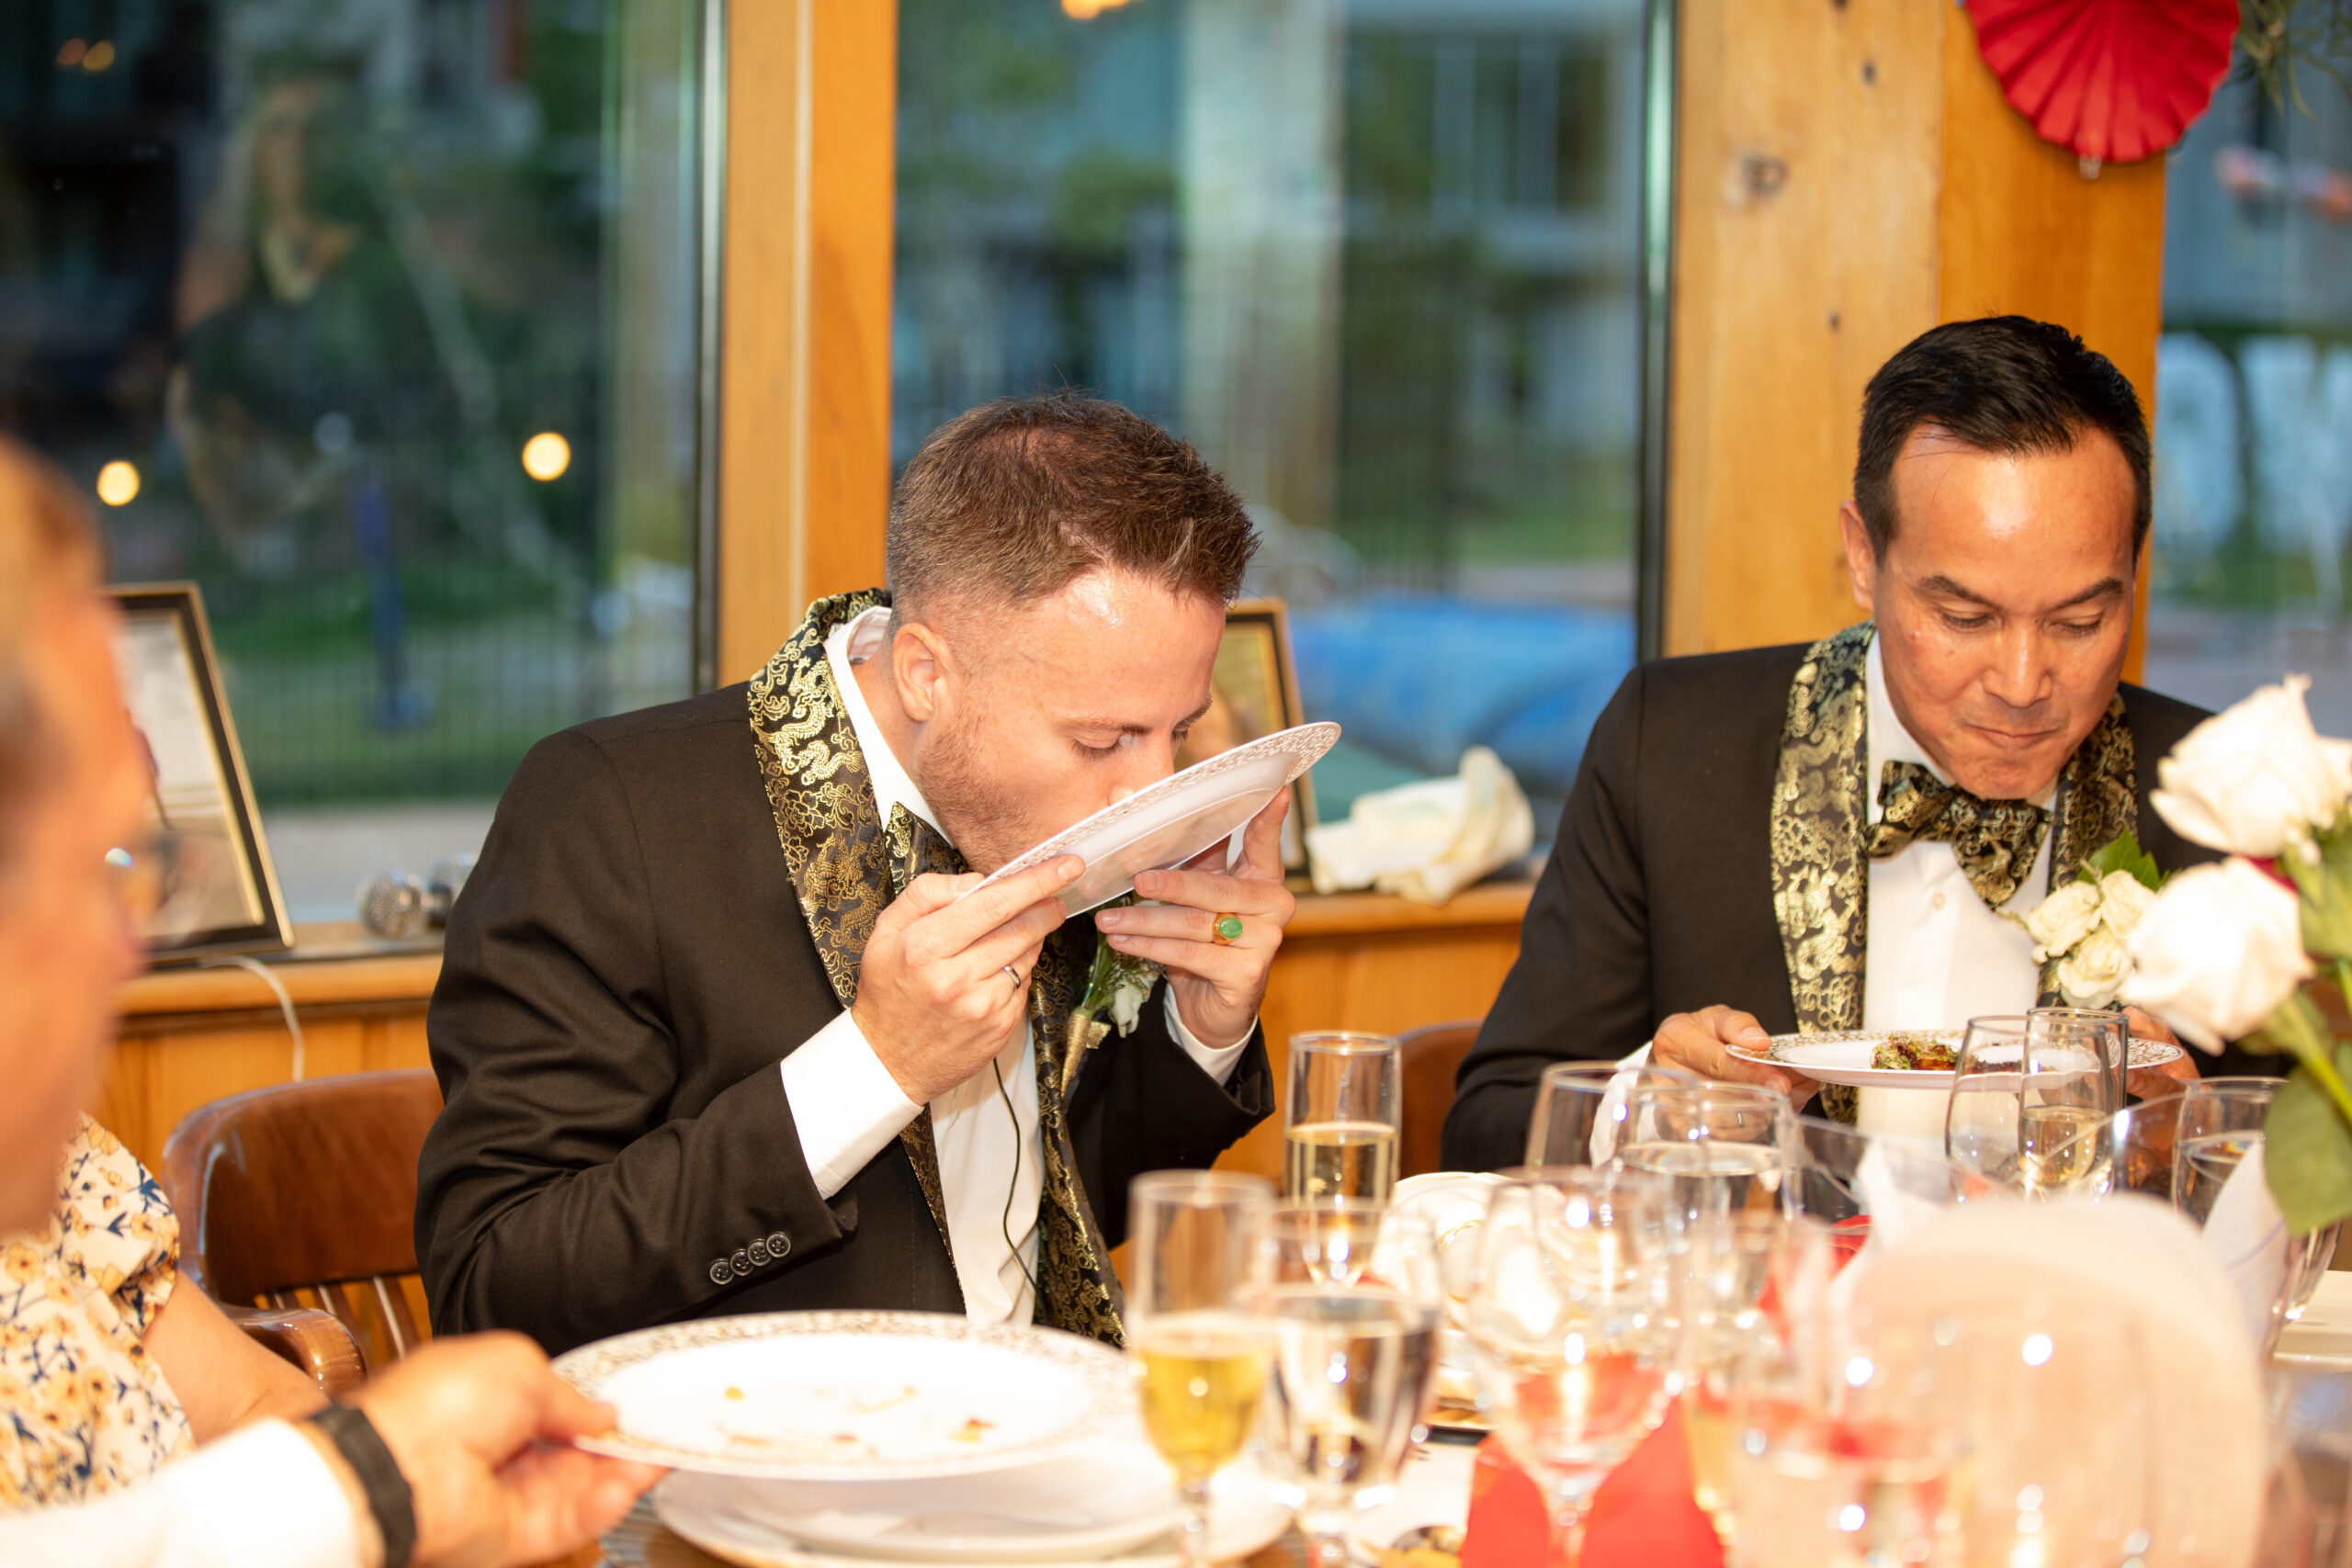 The couple participating in the “Lick a Plate” activity at their wedding dinner.